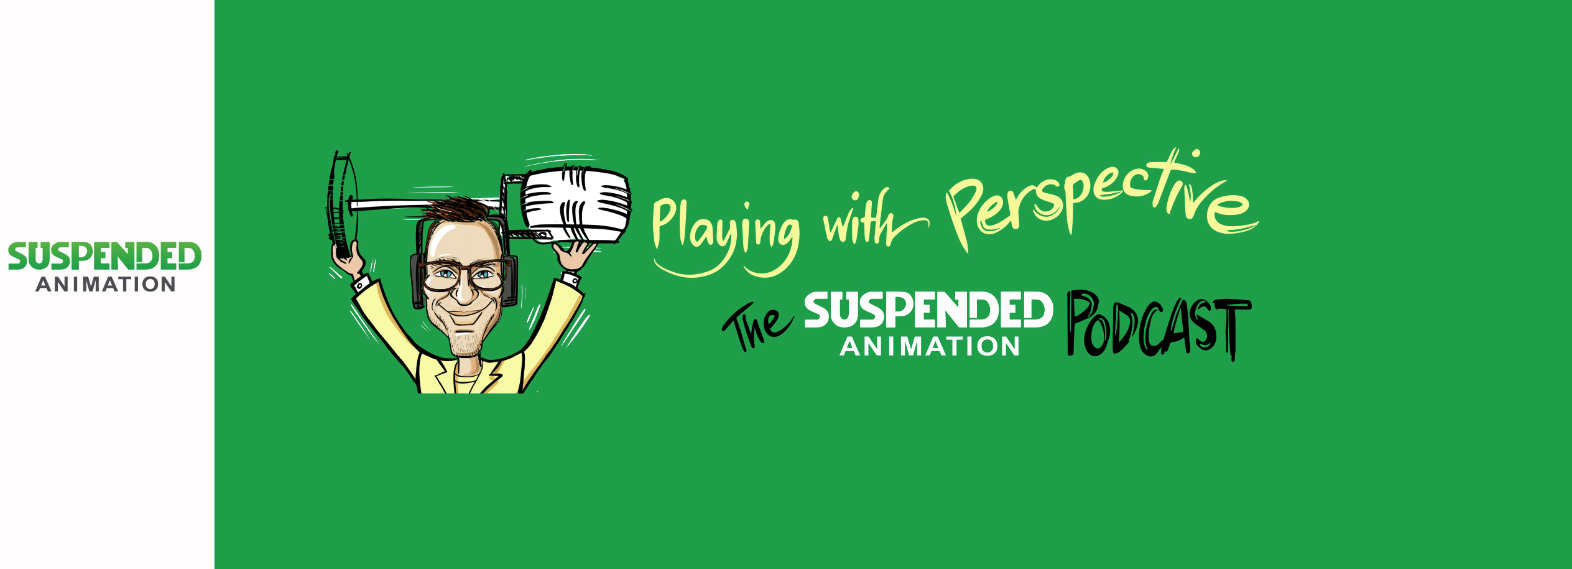 Playing With Perspective - The Suspended Animation Podcast